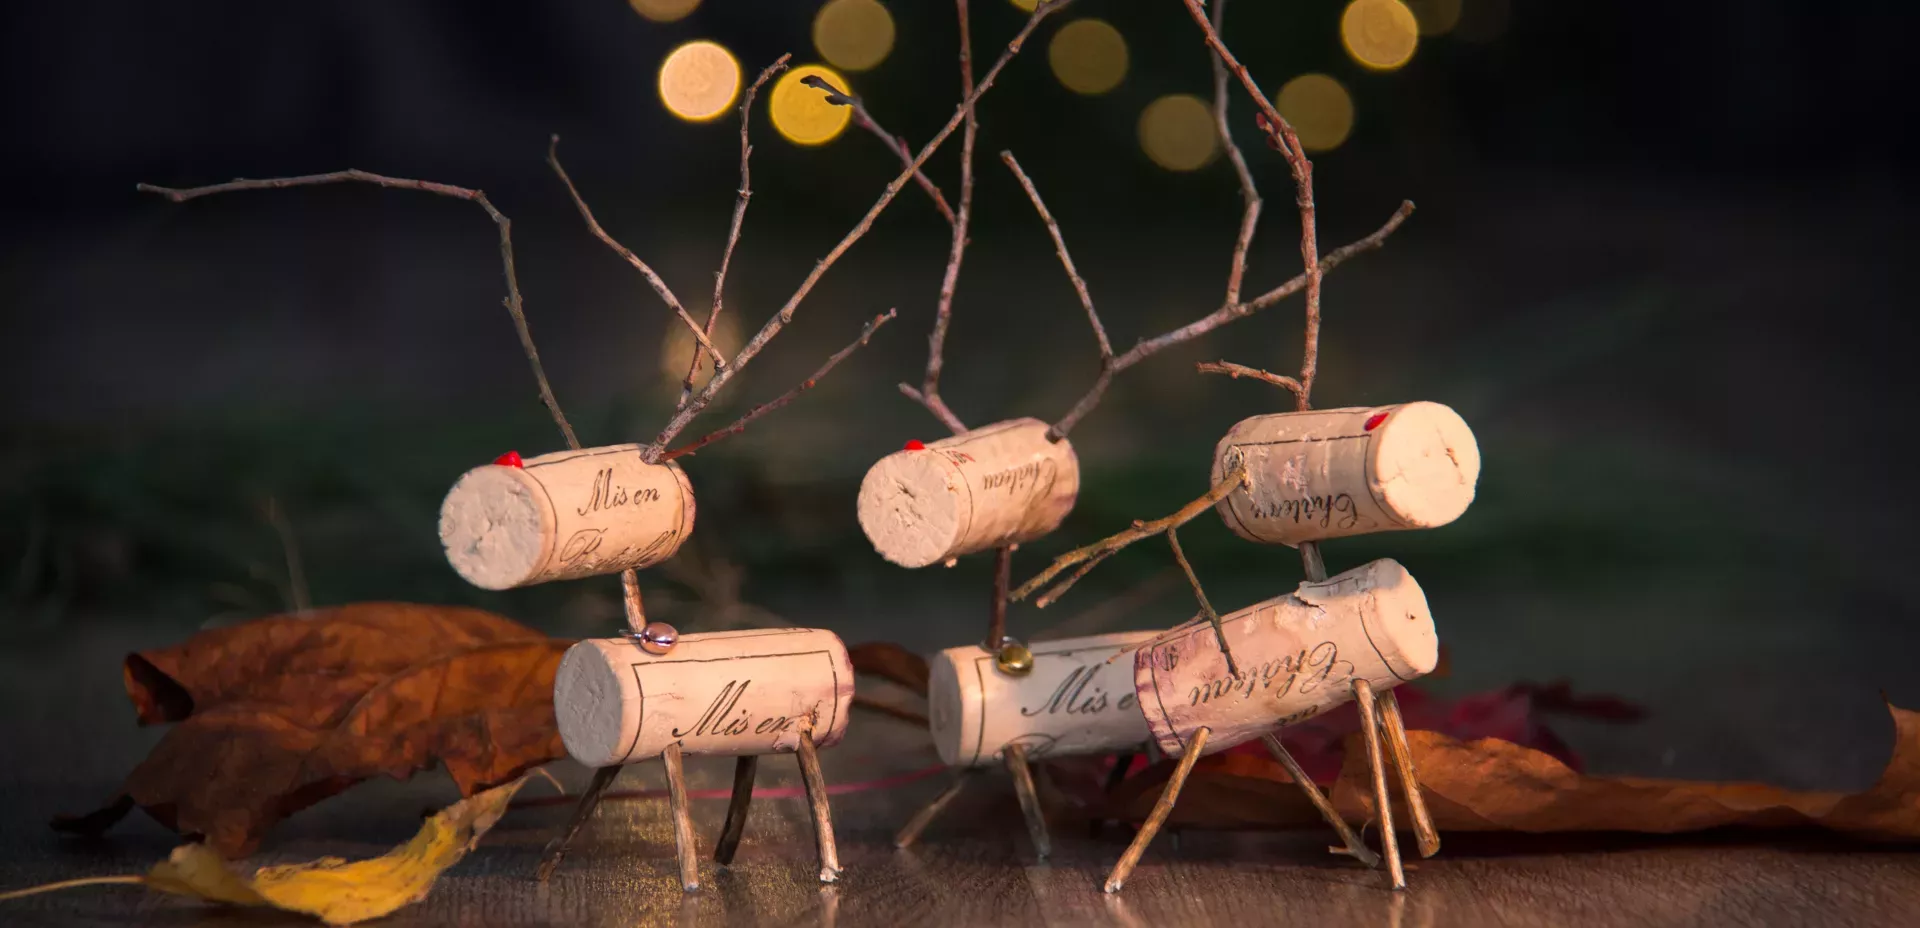 Make this zero waste cute Christmas reindeer craft for Christmas!